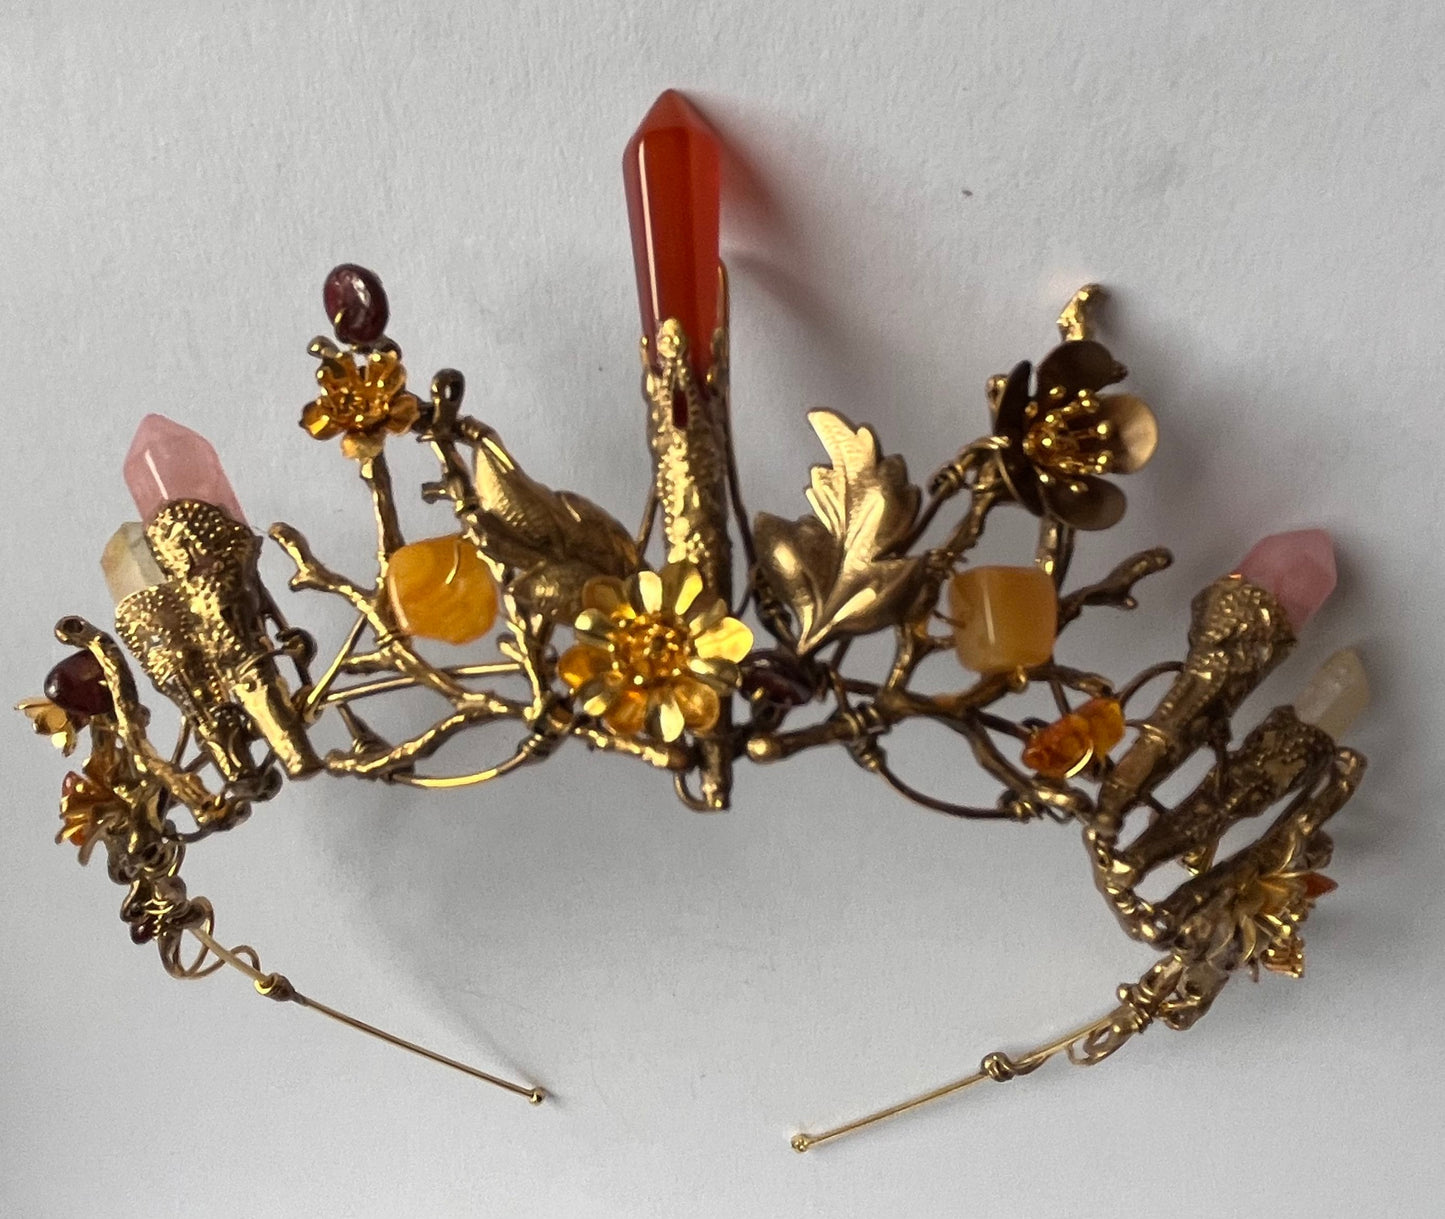 The AUBREY Earth & Fire Stones Crown